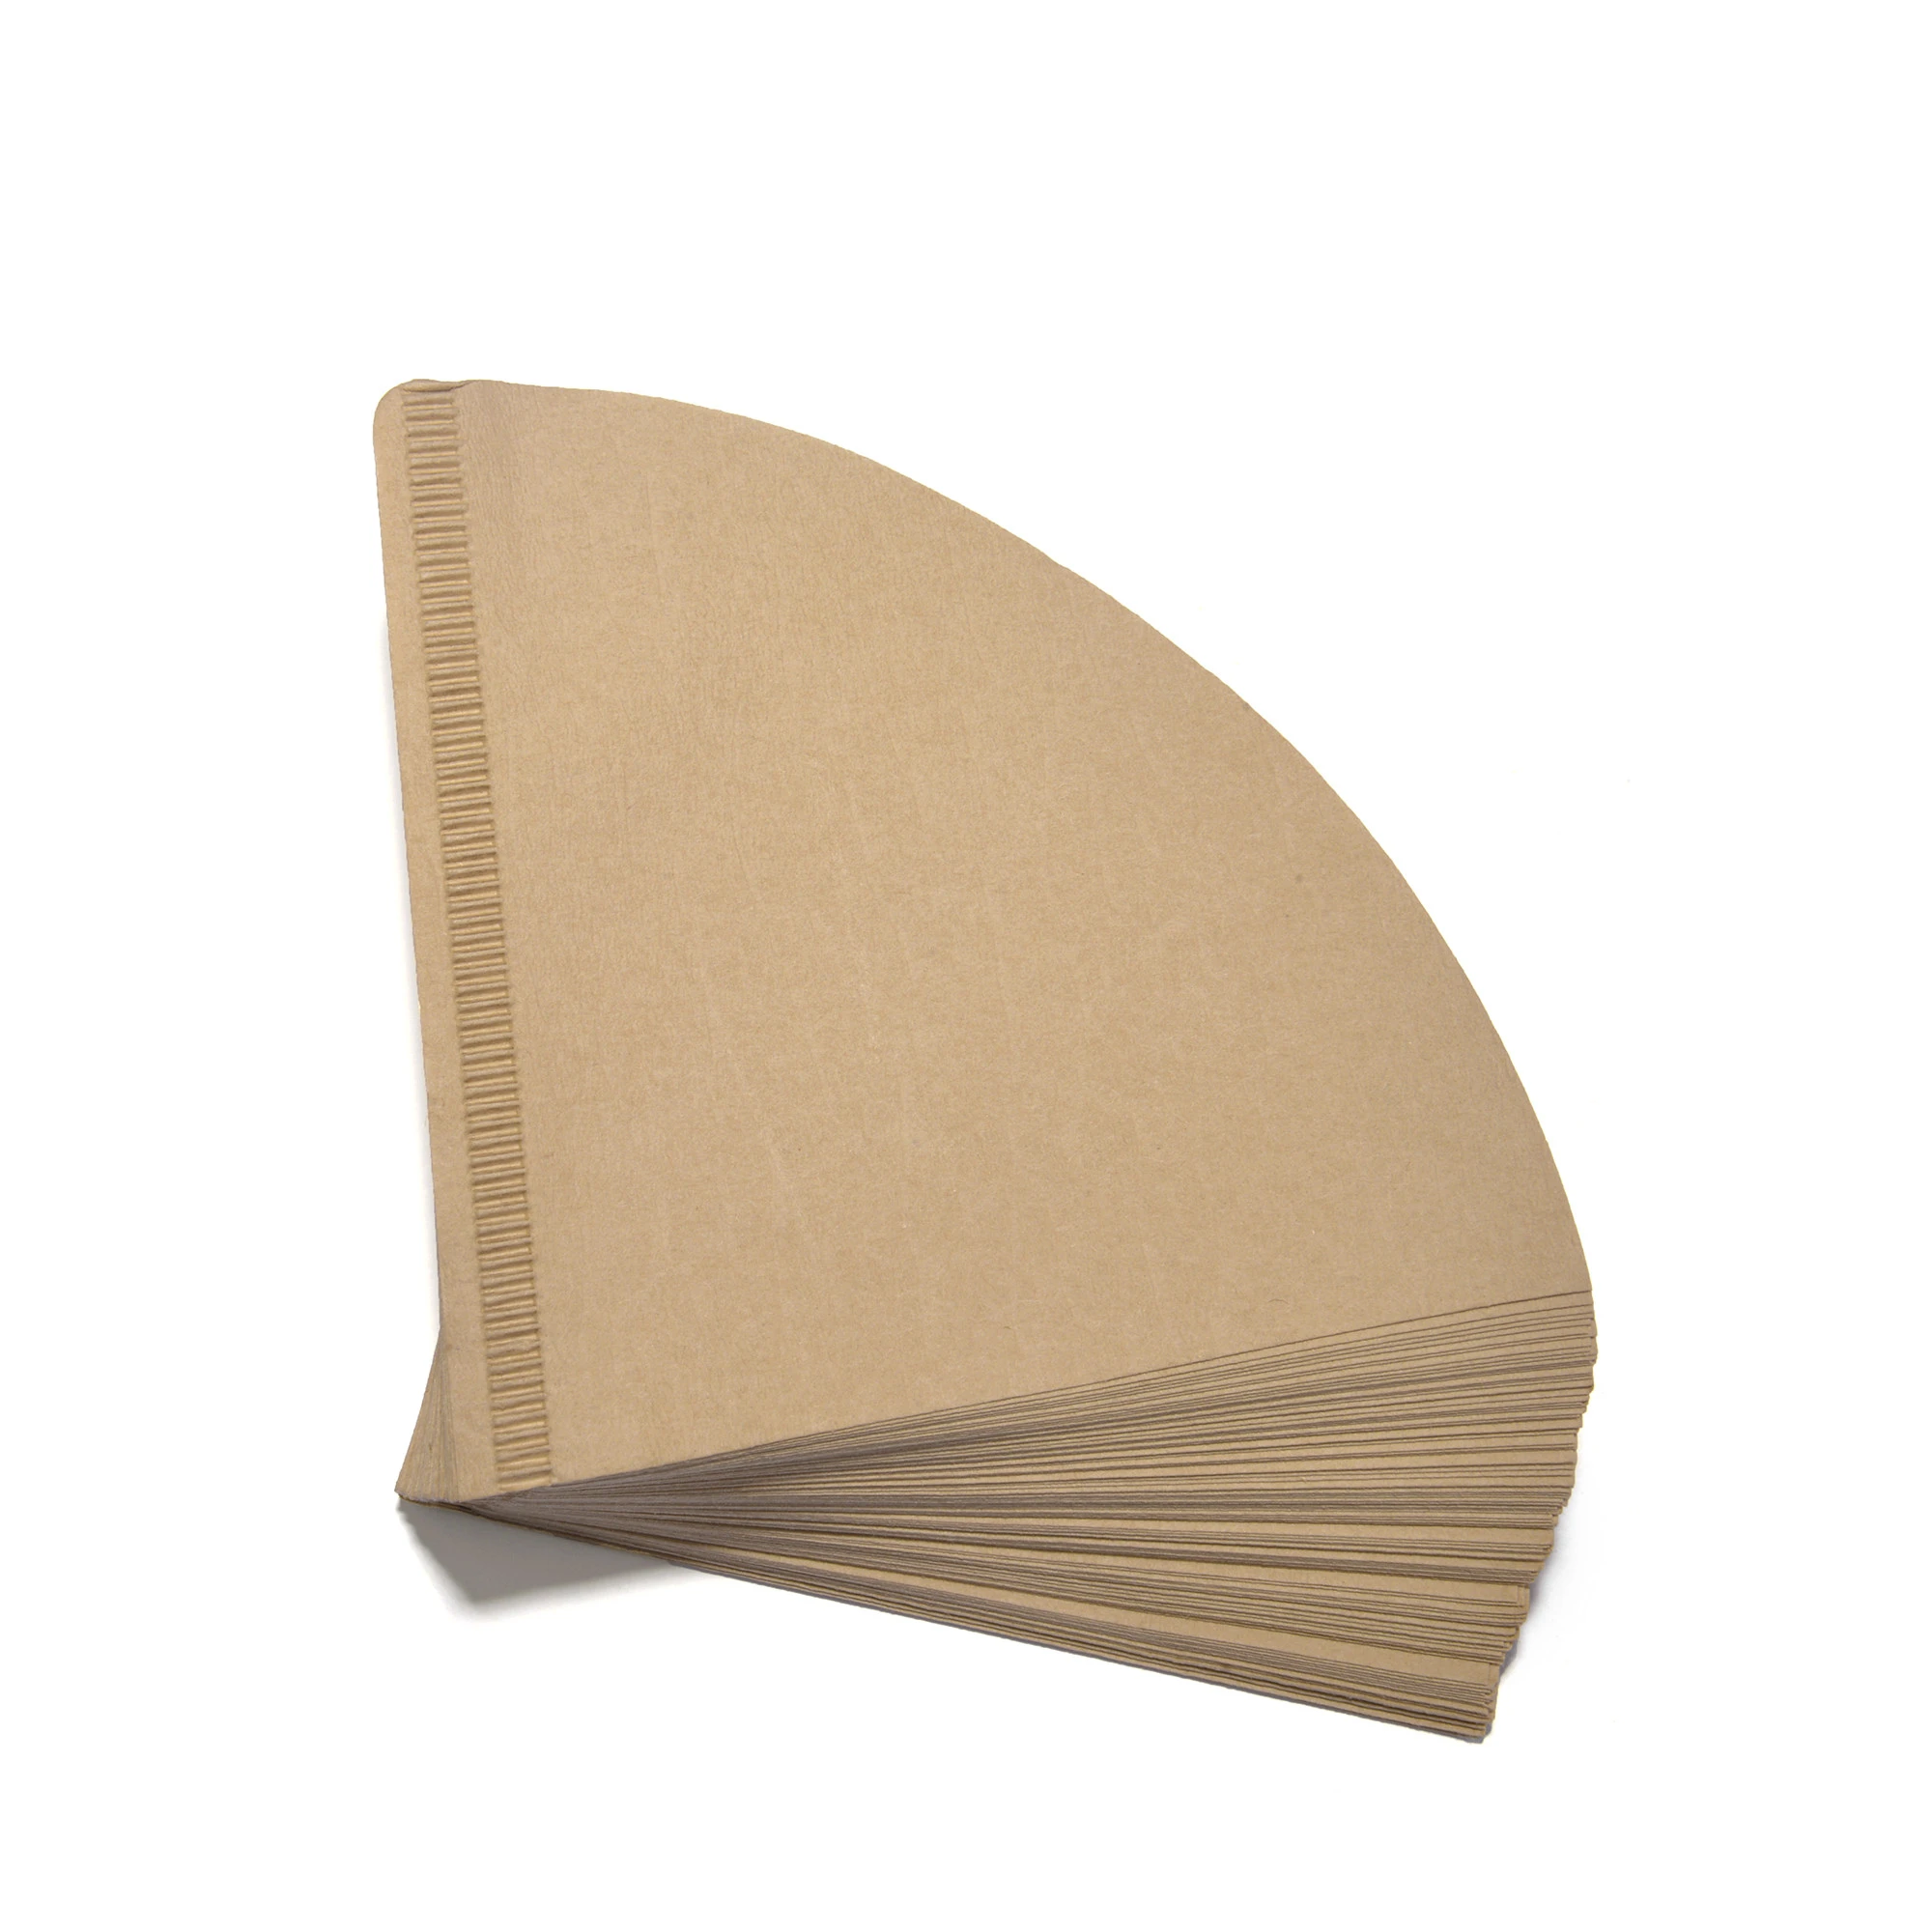 Top sale v60 Coffee Paper Filter (Size 01, 100 Count, Natural)